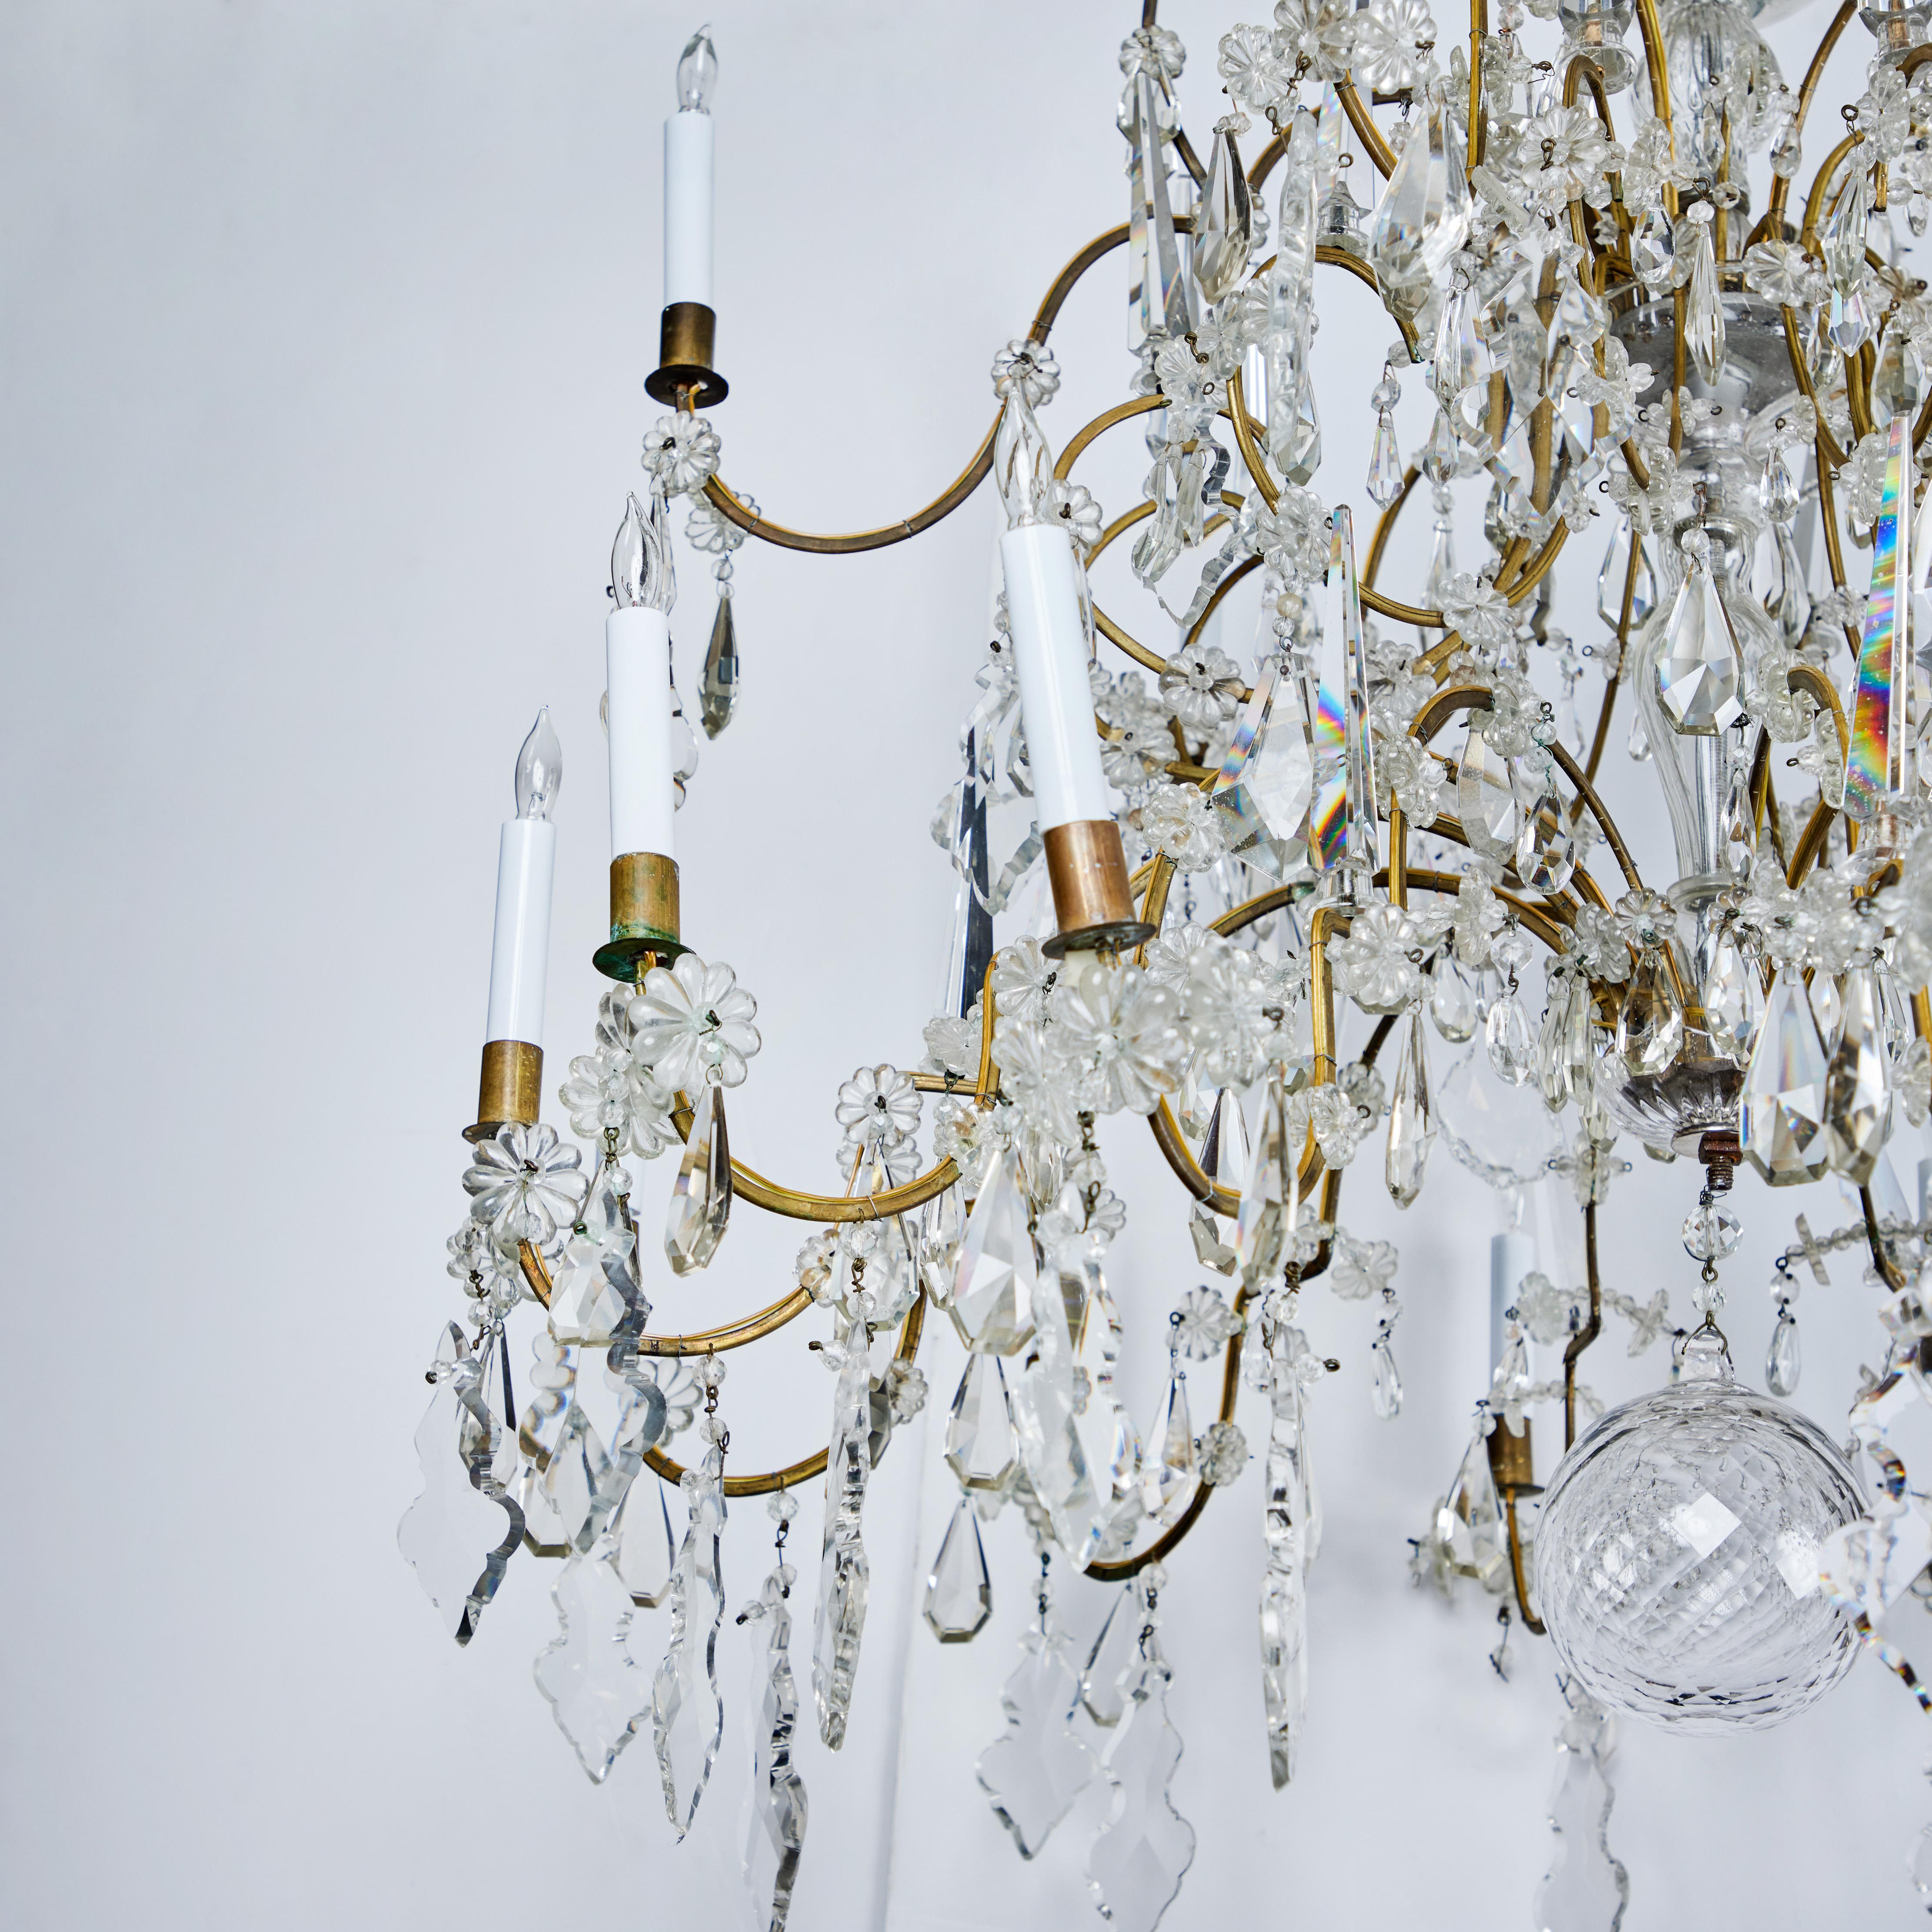 Grand, two-tiered, elegantly appointed, turn of the century, gilded metal and crystal chandelier from Northern Italy. 18 cascading and scrolling arms sit amidst crystal towers, flower forms and large faceted drops below a dramatic canopy. Newly